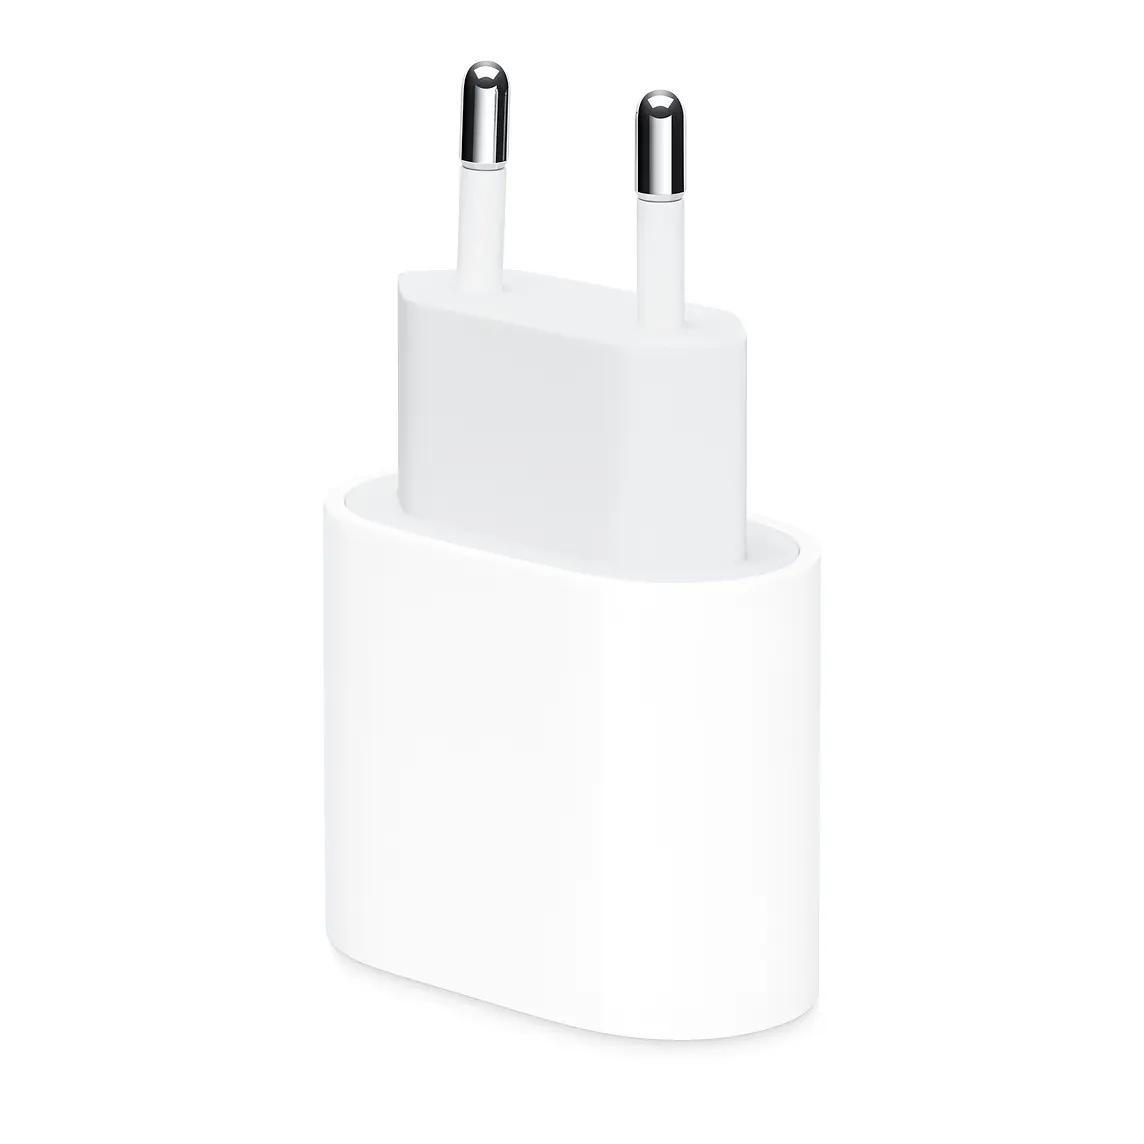 MHJE3ZM/A USB-C Power charger 20W